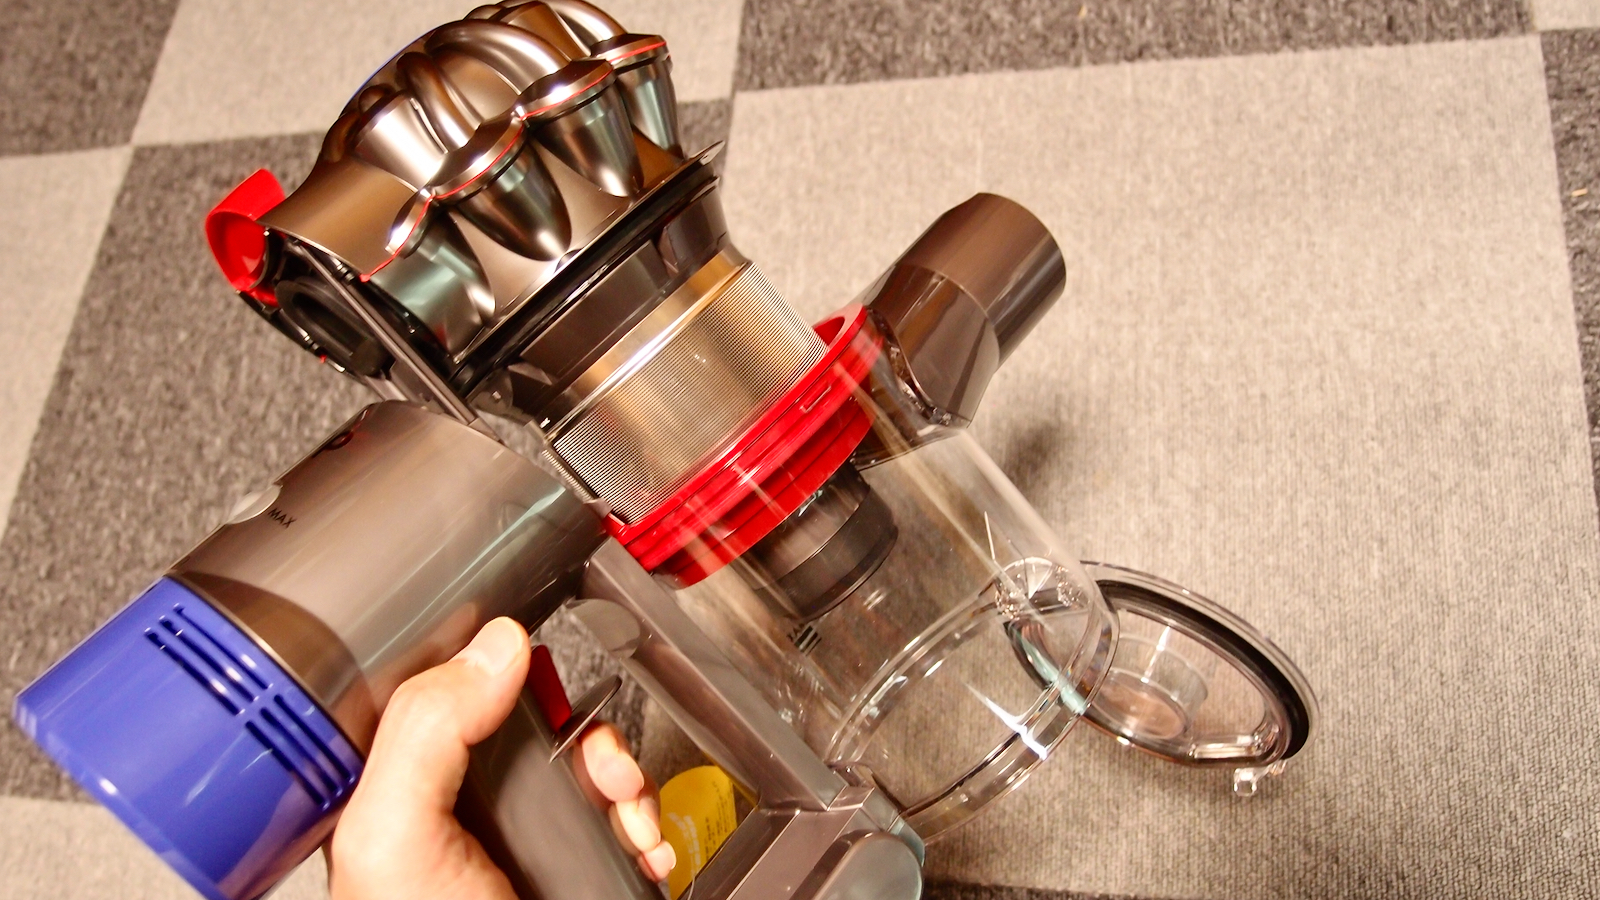 Photo of dyson V8 clear bottle opening